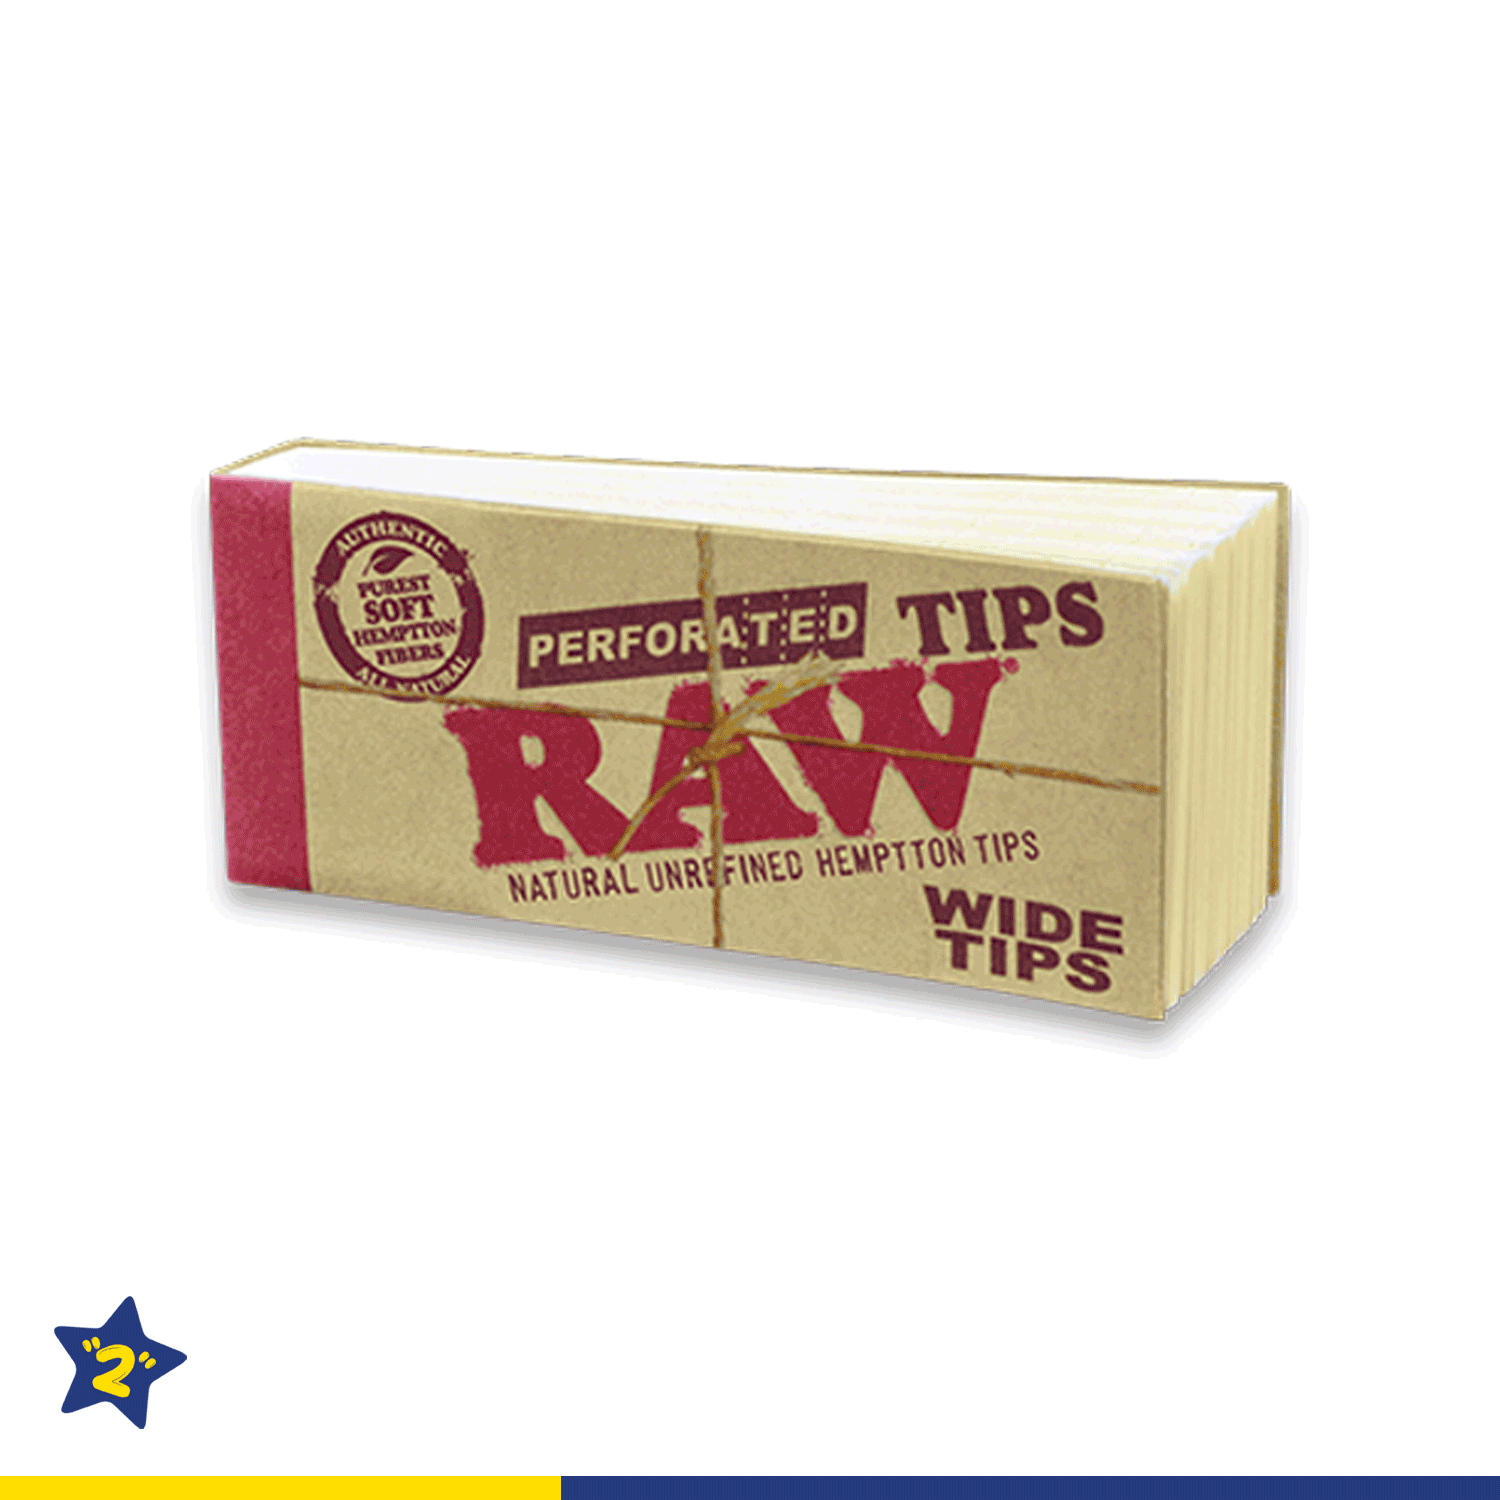 Raw Hemp & Cotton Perforated Wide Tips